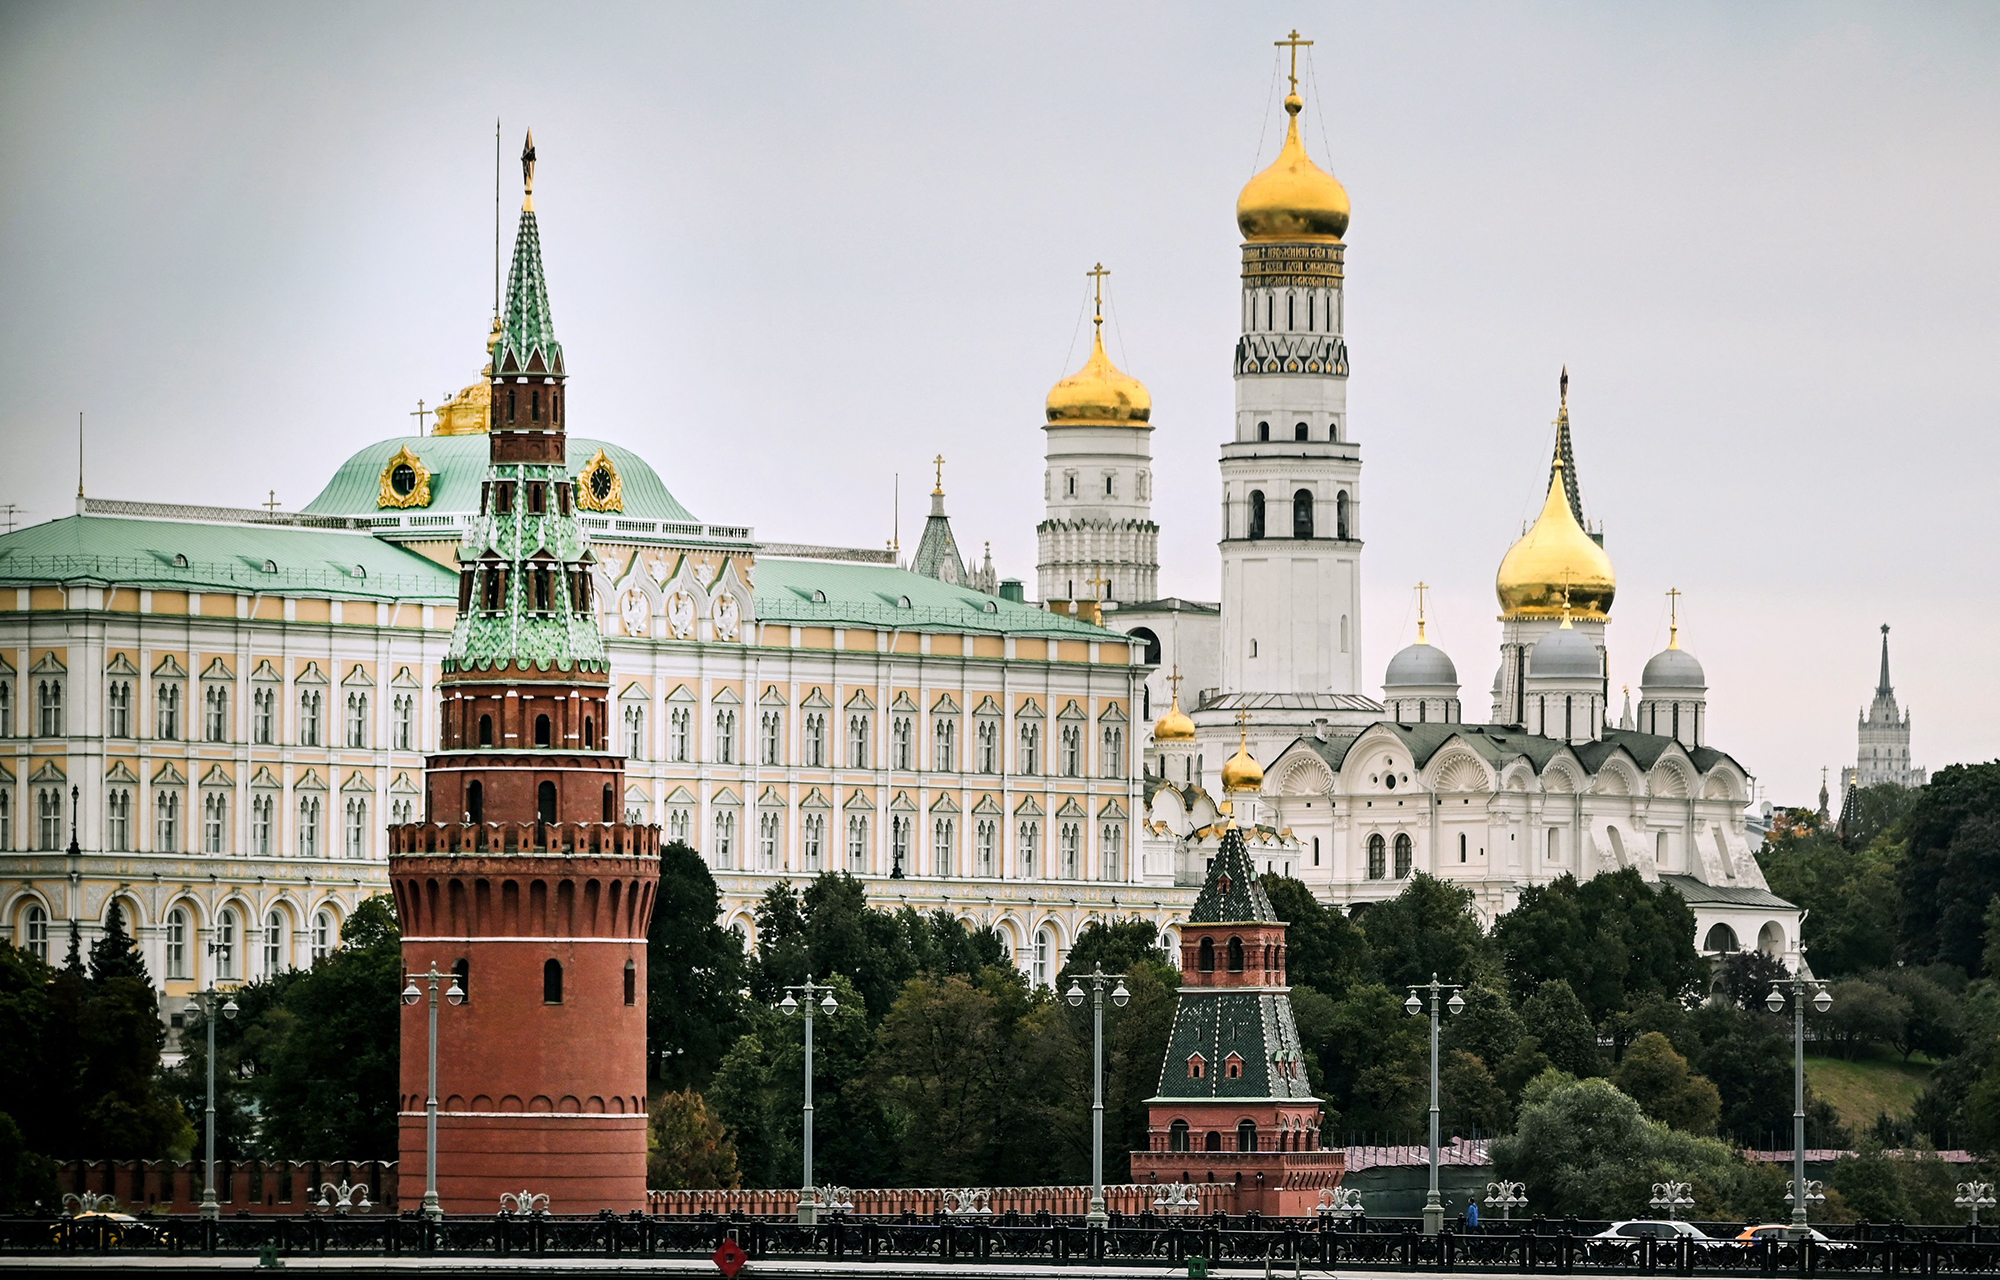 A view of the Kremlin in Moscow, Russia, on September 19, 2021.